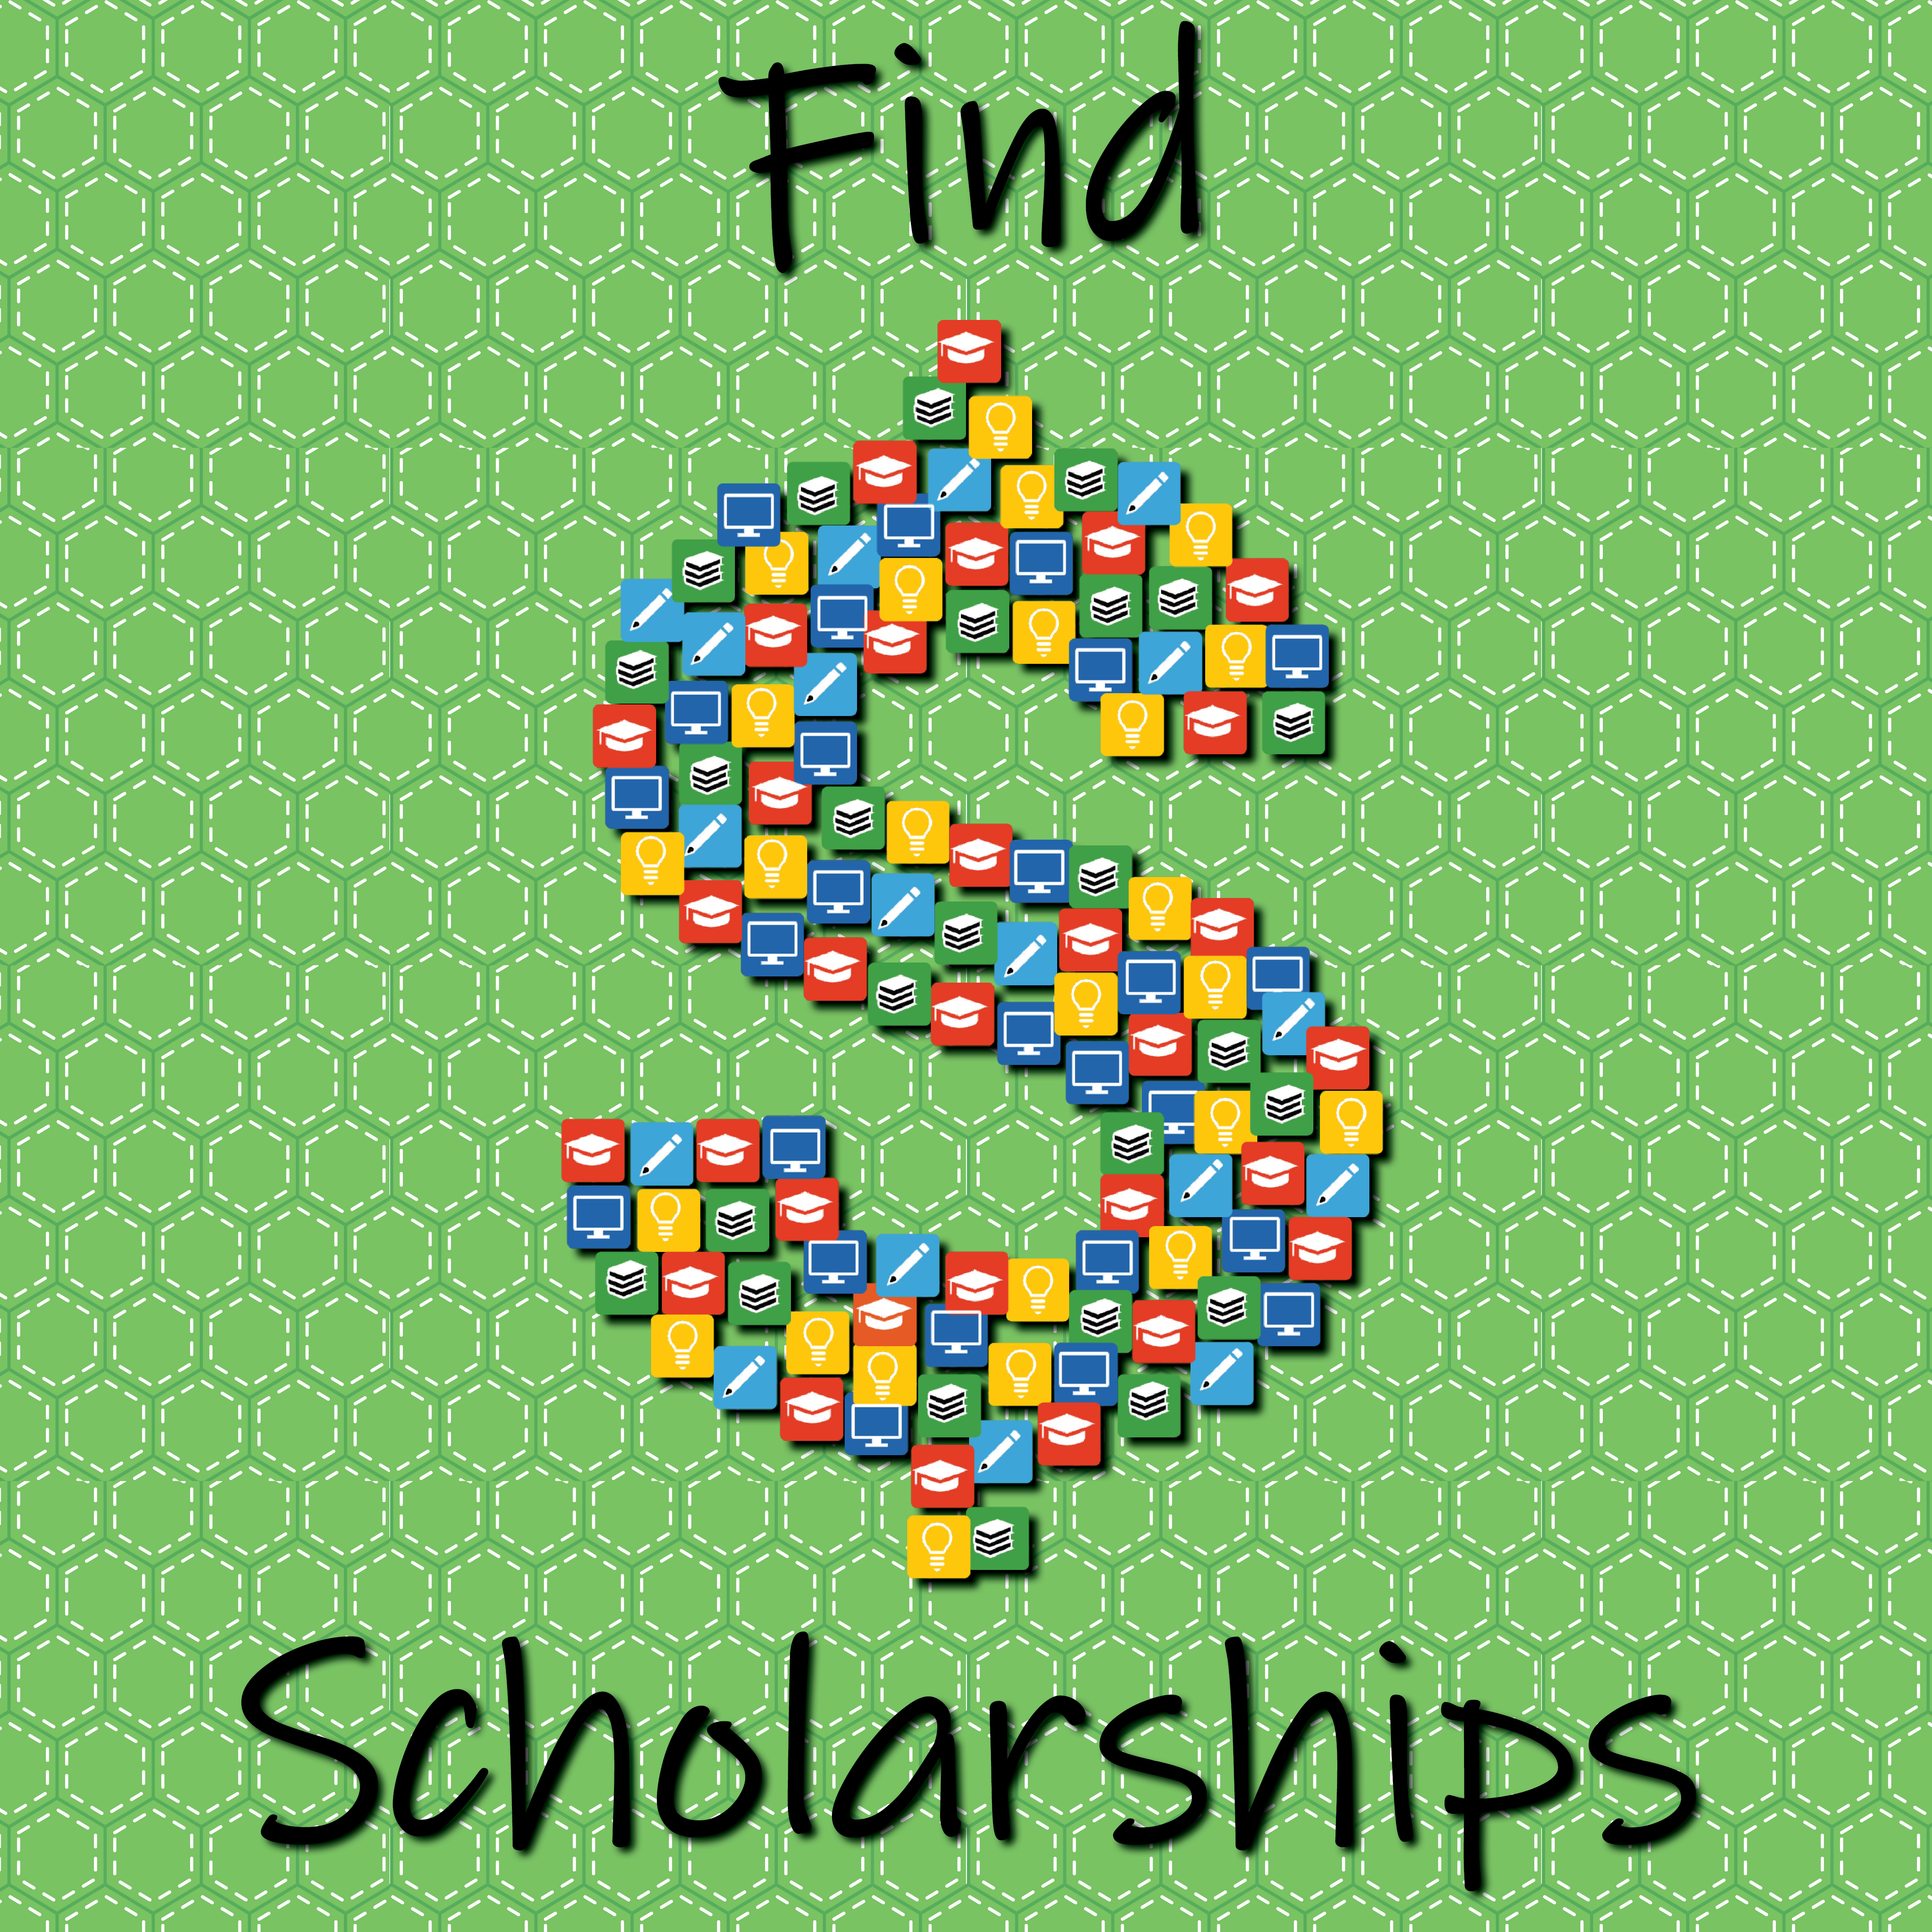 Find Scholarships